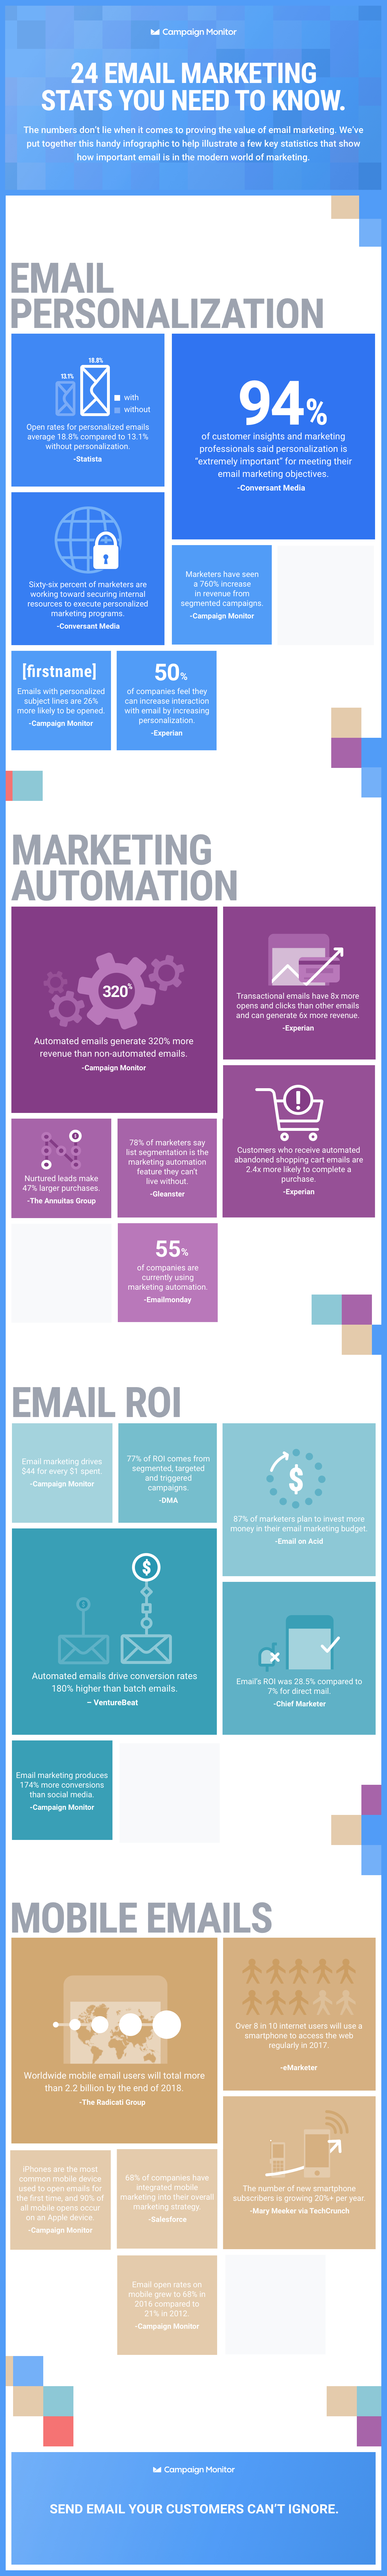 24 Email Marketing Stats You Need to Know - Infographic by Campaign Monitor